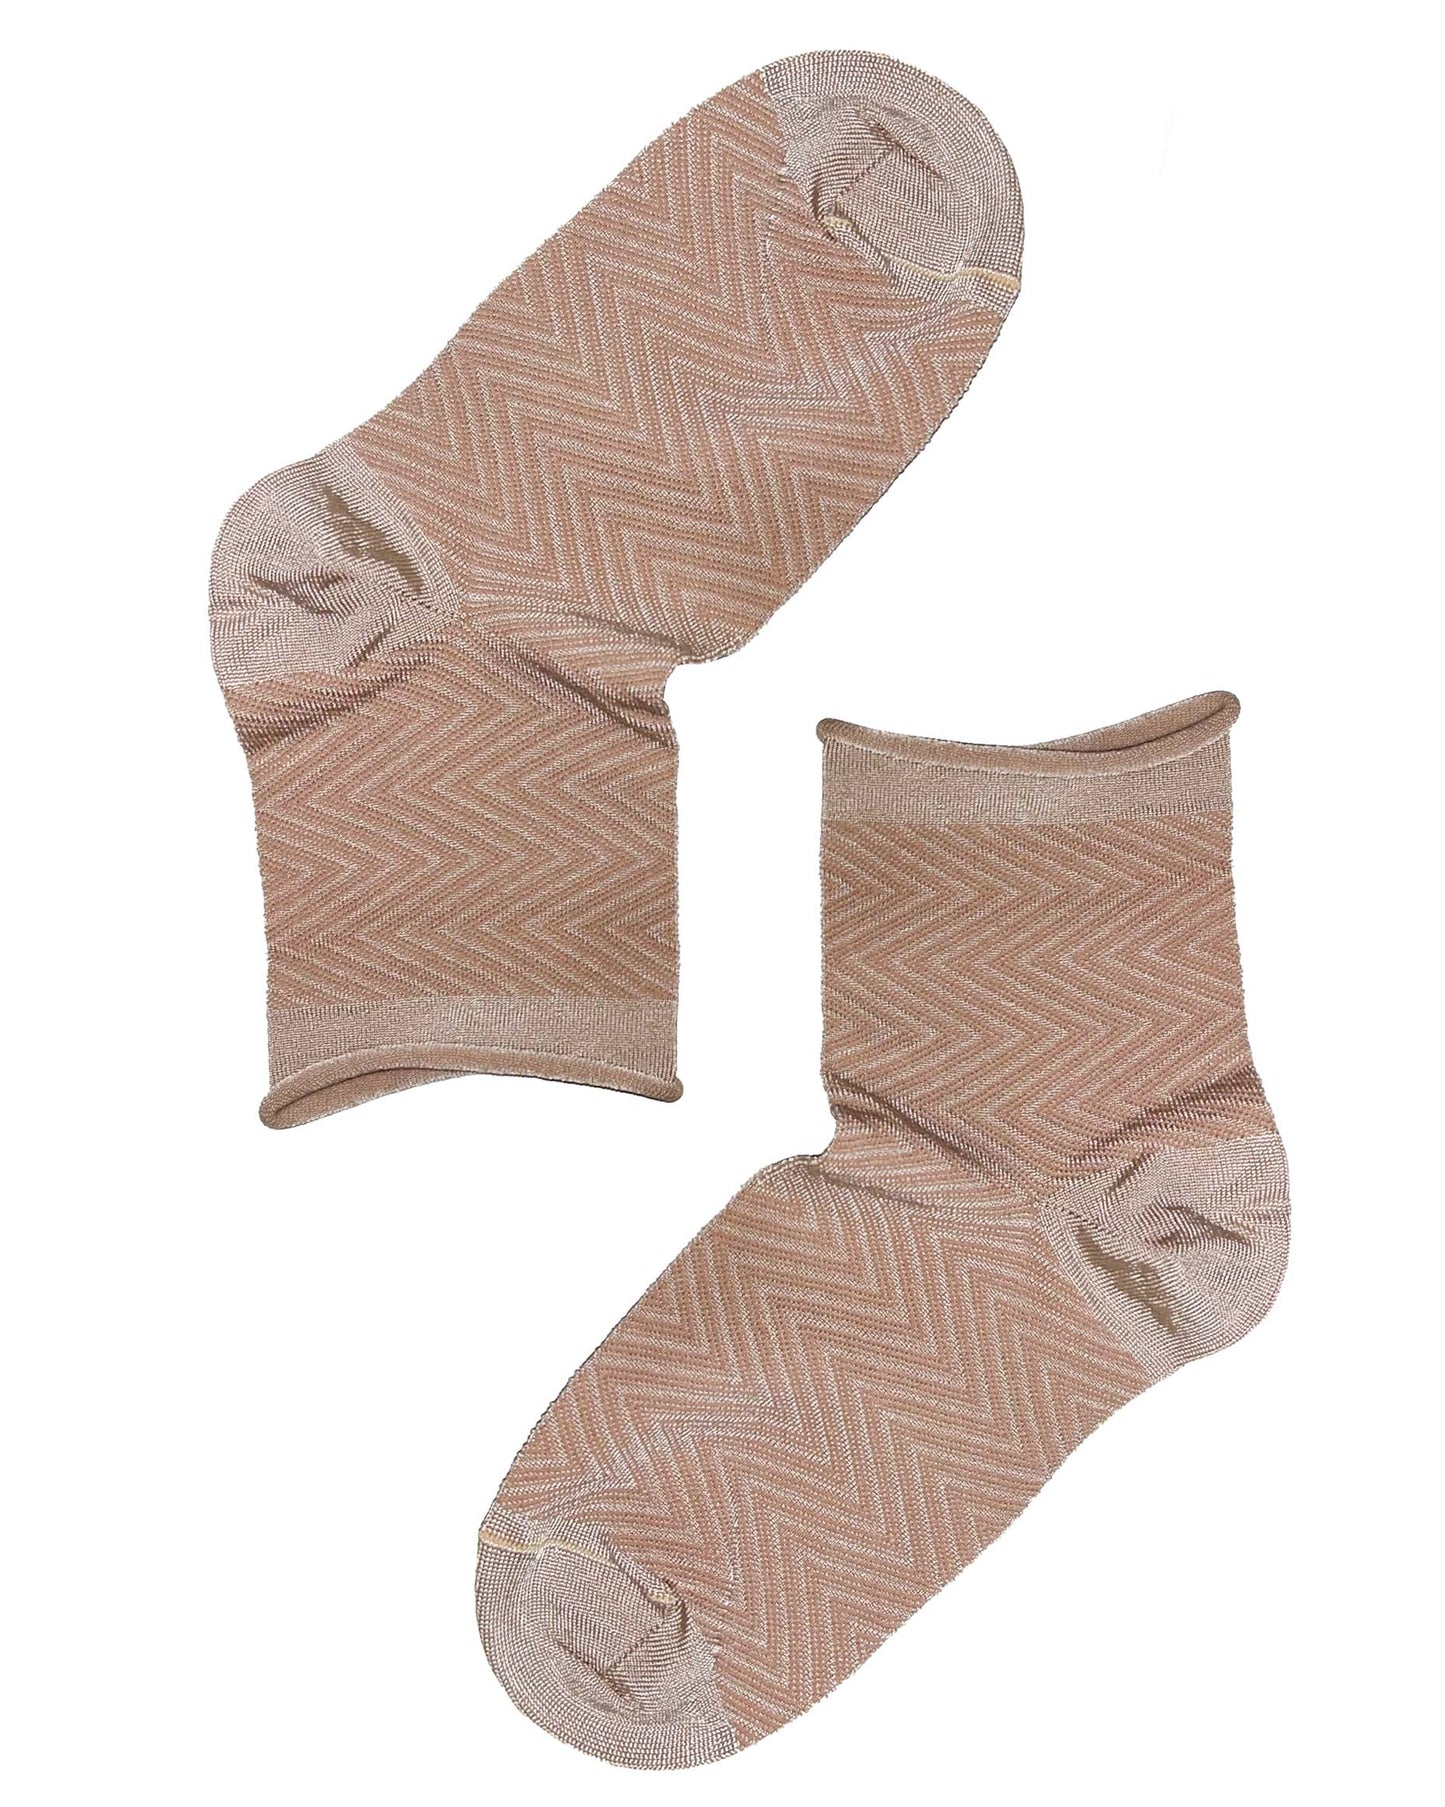 SiSi Spinato Calzino - Nude and beige fashion viscose sock with contrasting zig-zag herringbone style pattern, shaped heel and flat toe seam and a raw cut roll top comfort edged cuff. 